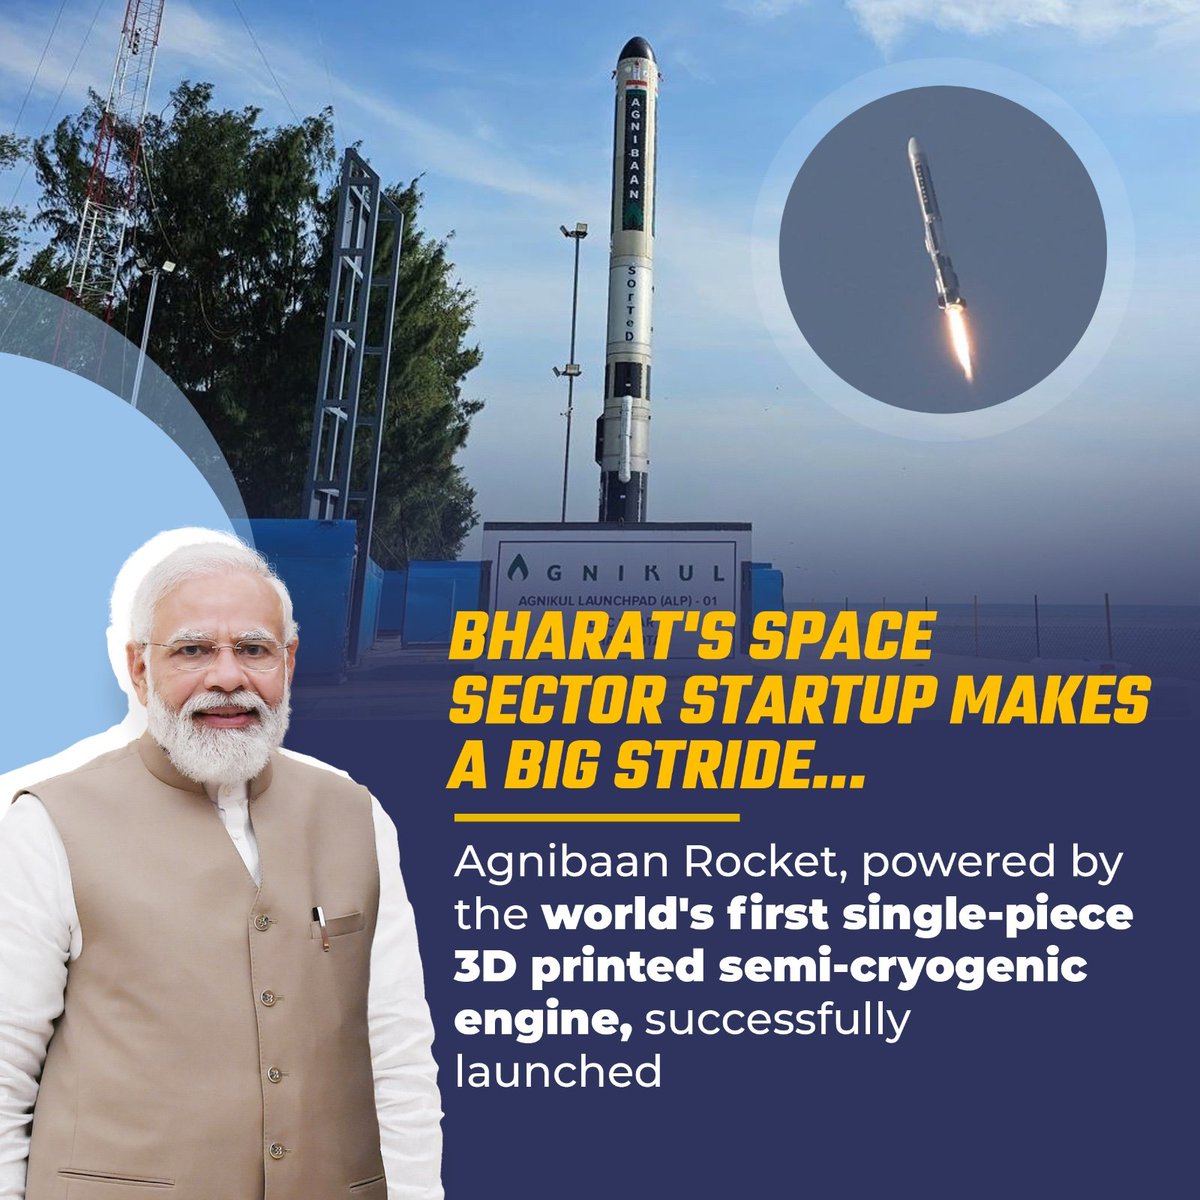 Congratulations! 🇮🇳
The successful launch of Agnibaan rocket by AgniKul Cosmos is a testimony to unprecedented capabilities, capacities, vigour and self-reliance of New India's space sector!
#AgnikulCosmos #Agnibaan #MakeInIndia #ISRO